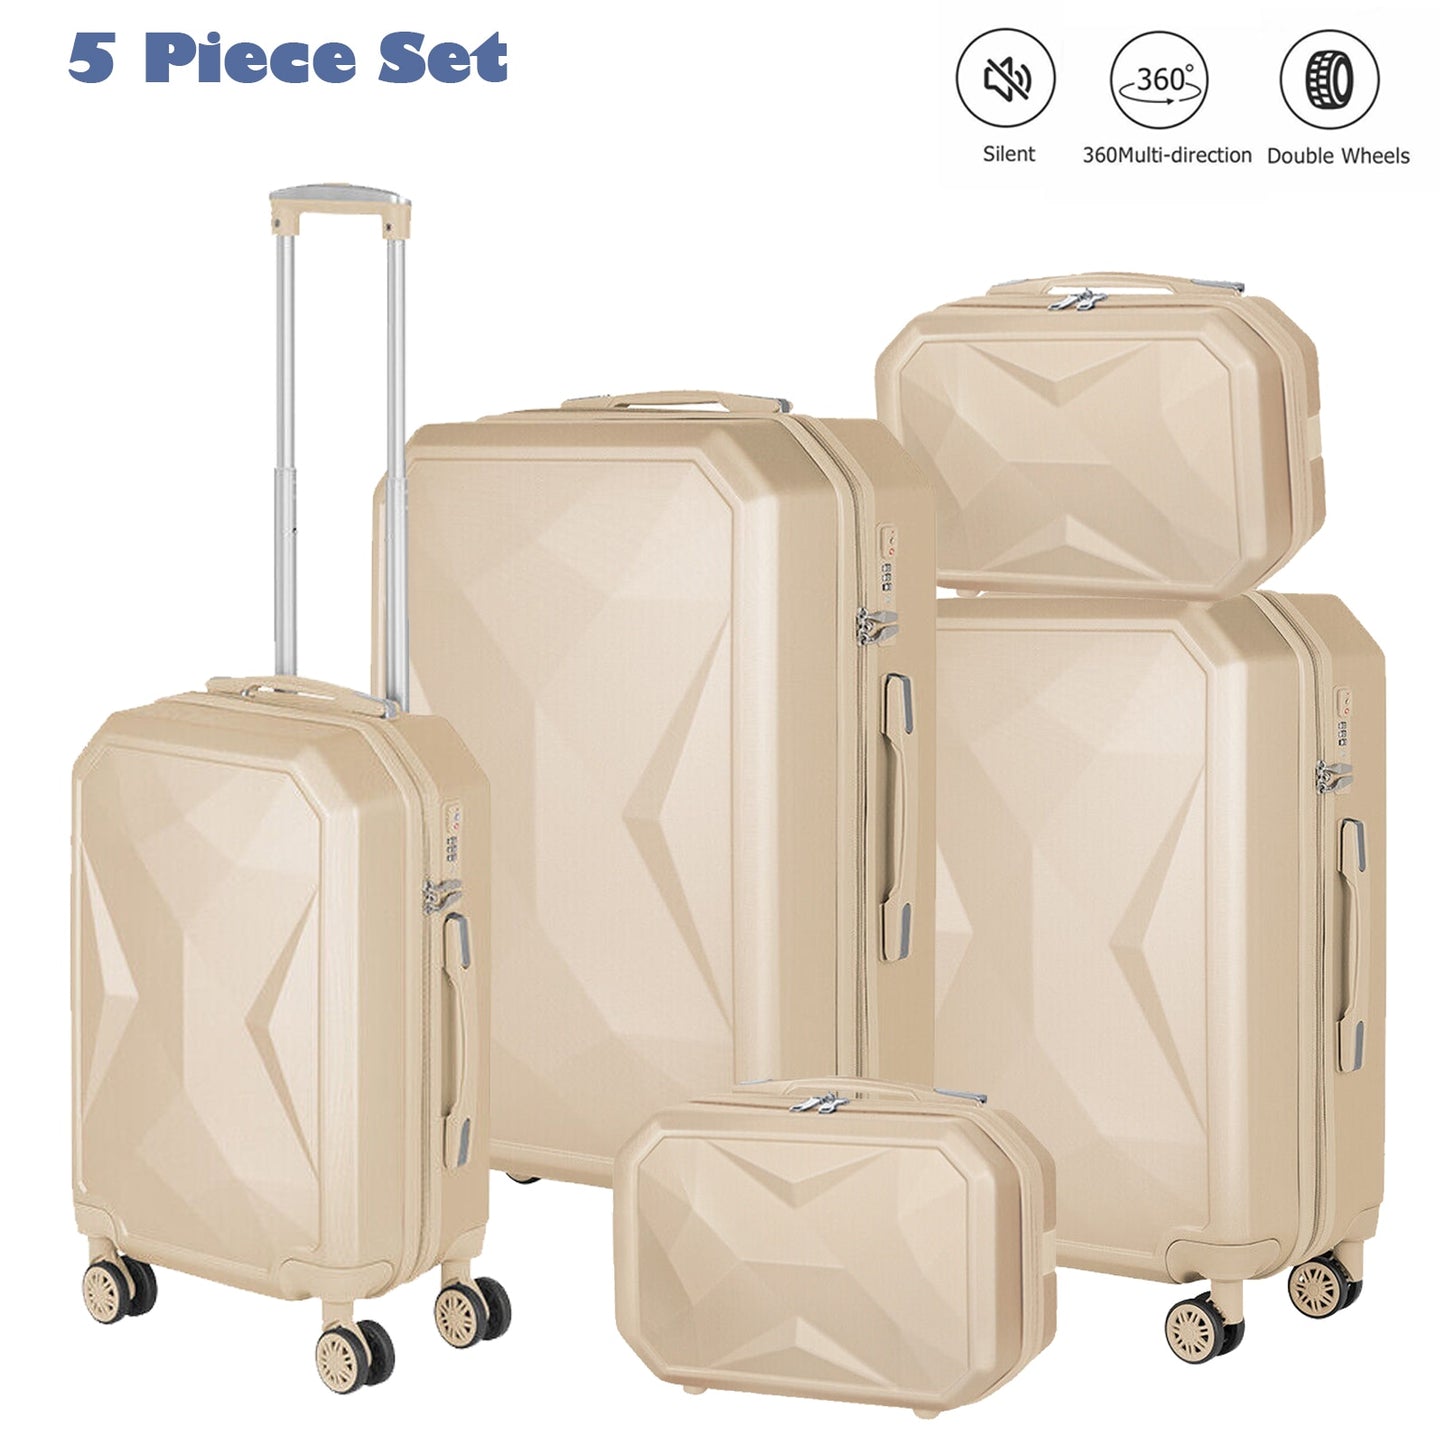 5 Pieces Cosmetic Suitcase with 360 Degree Spinner Wheels - atozdepot23